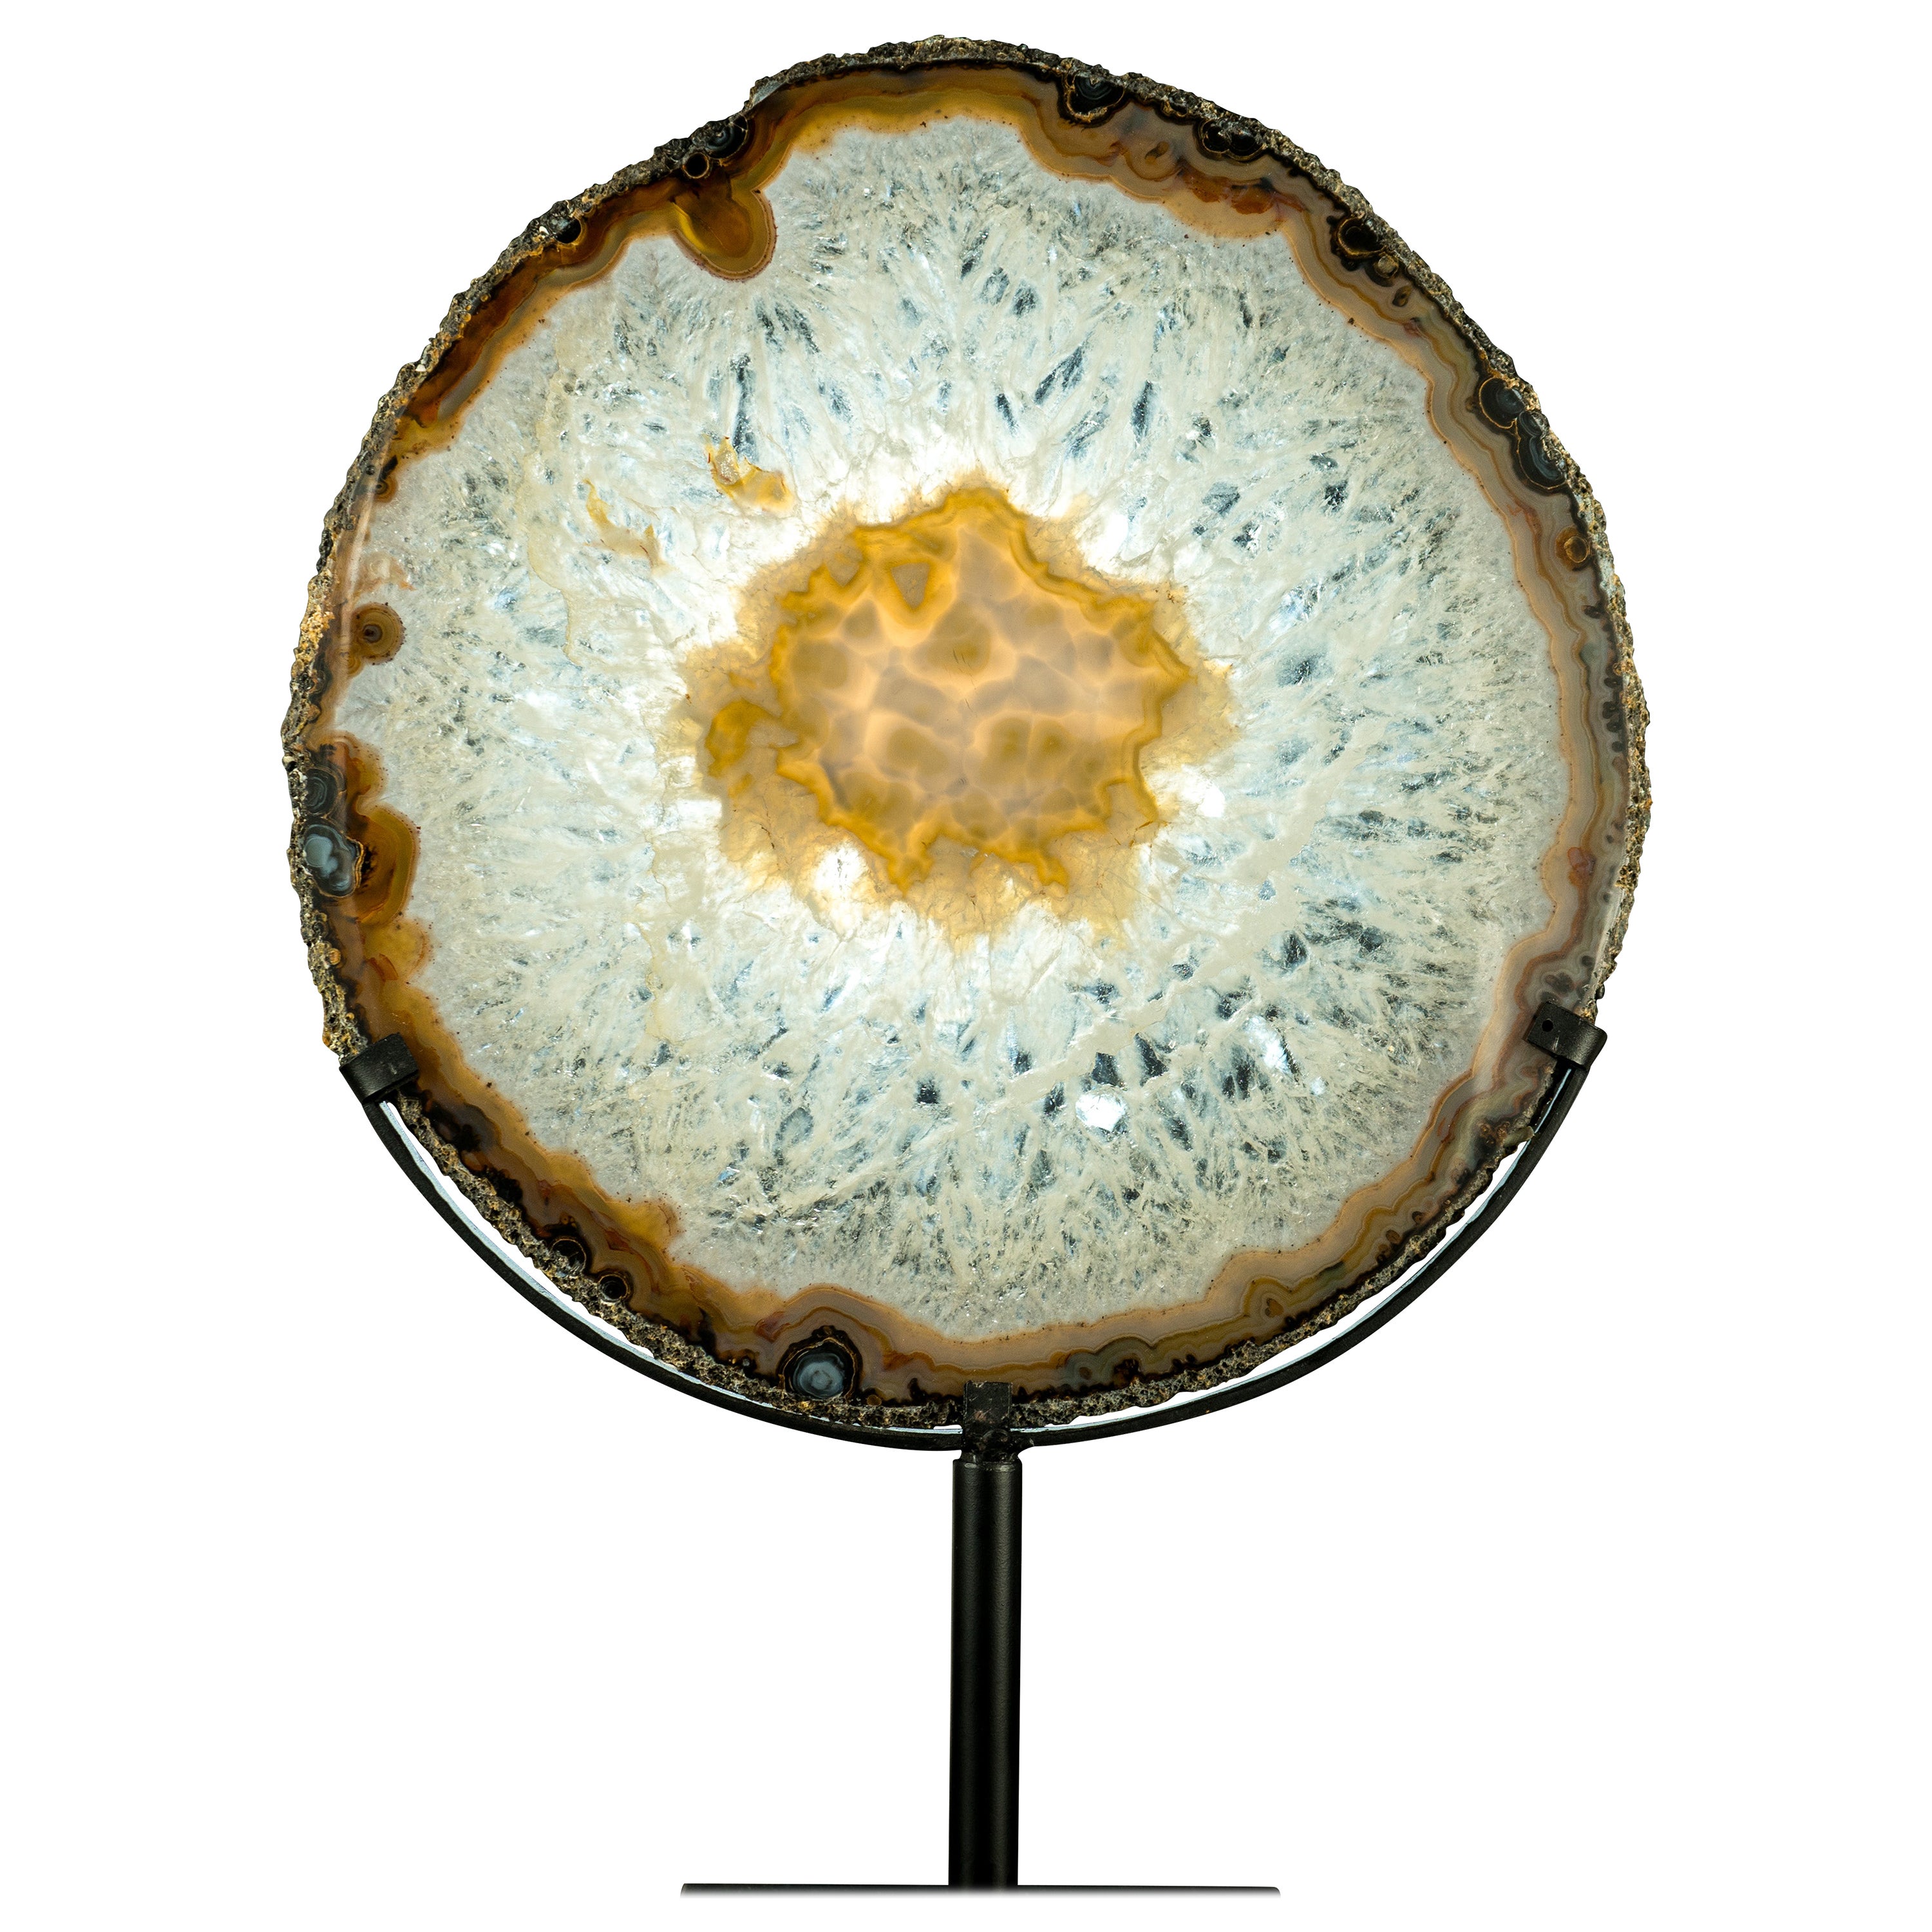 World-Class Large Lace Agate Slice, with Ice-Like Crystal and Colorful Agate